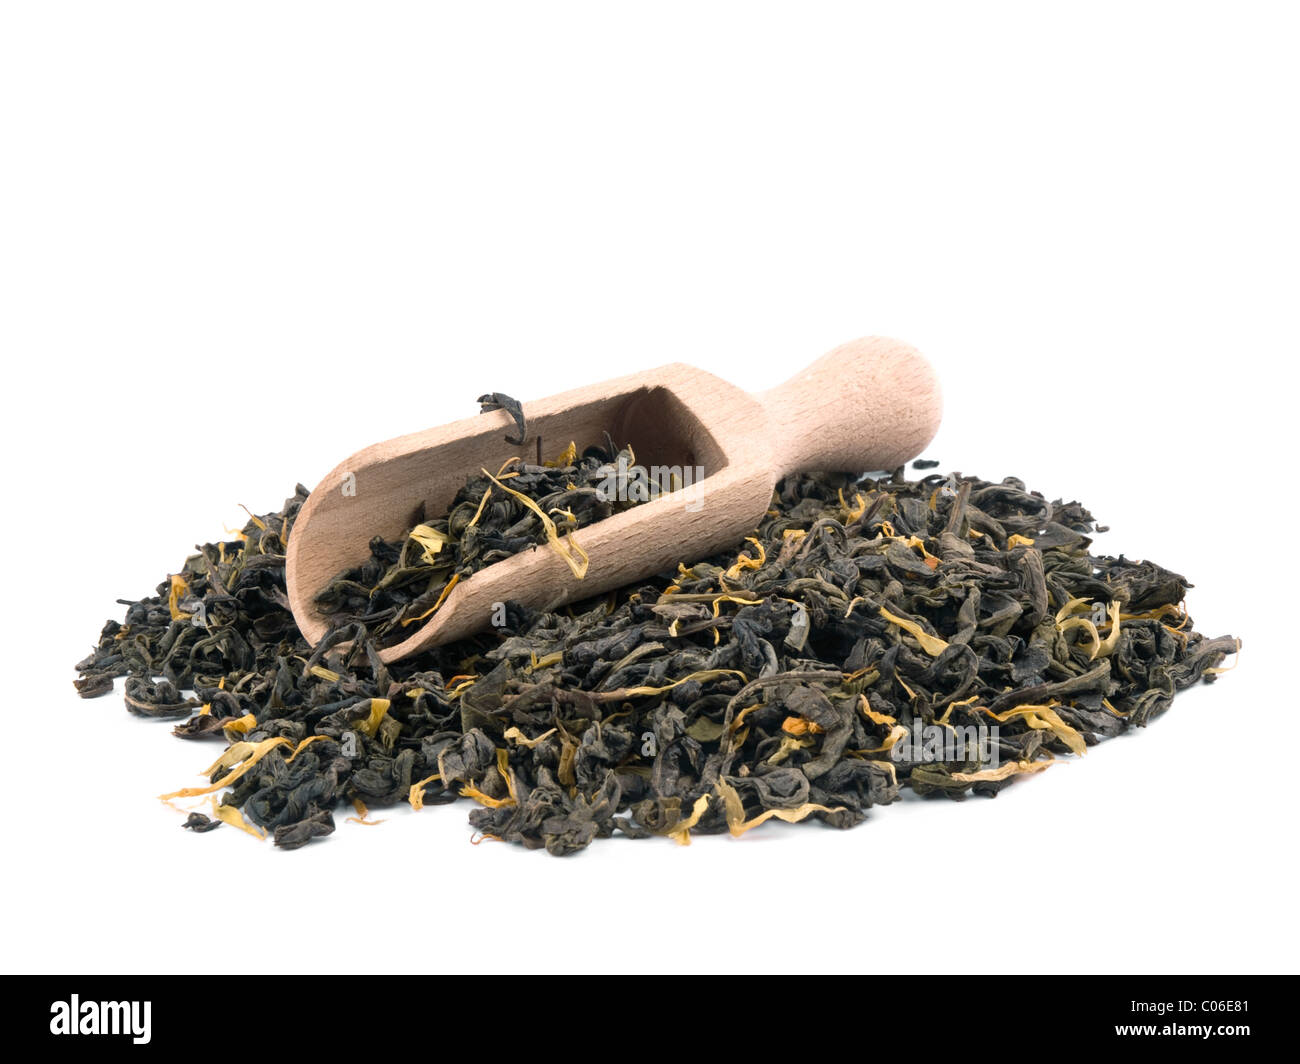 Aromatic green tea leaves with marigold petals and wooden shovel on white background Stock Photo